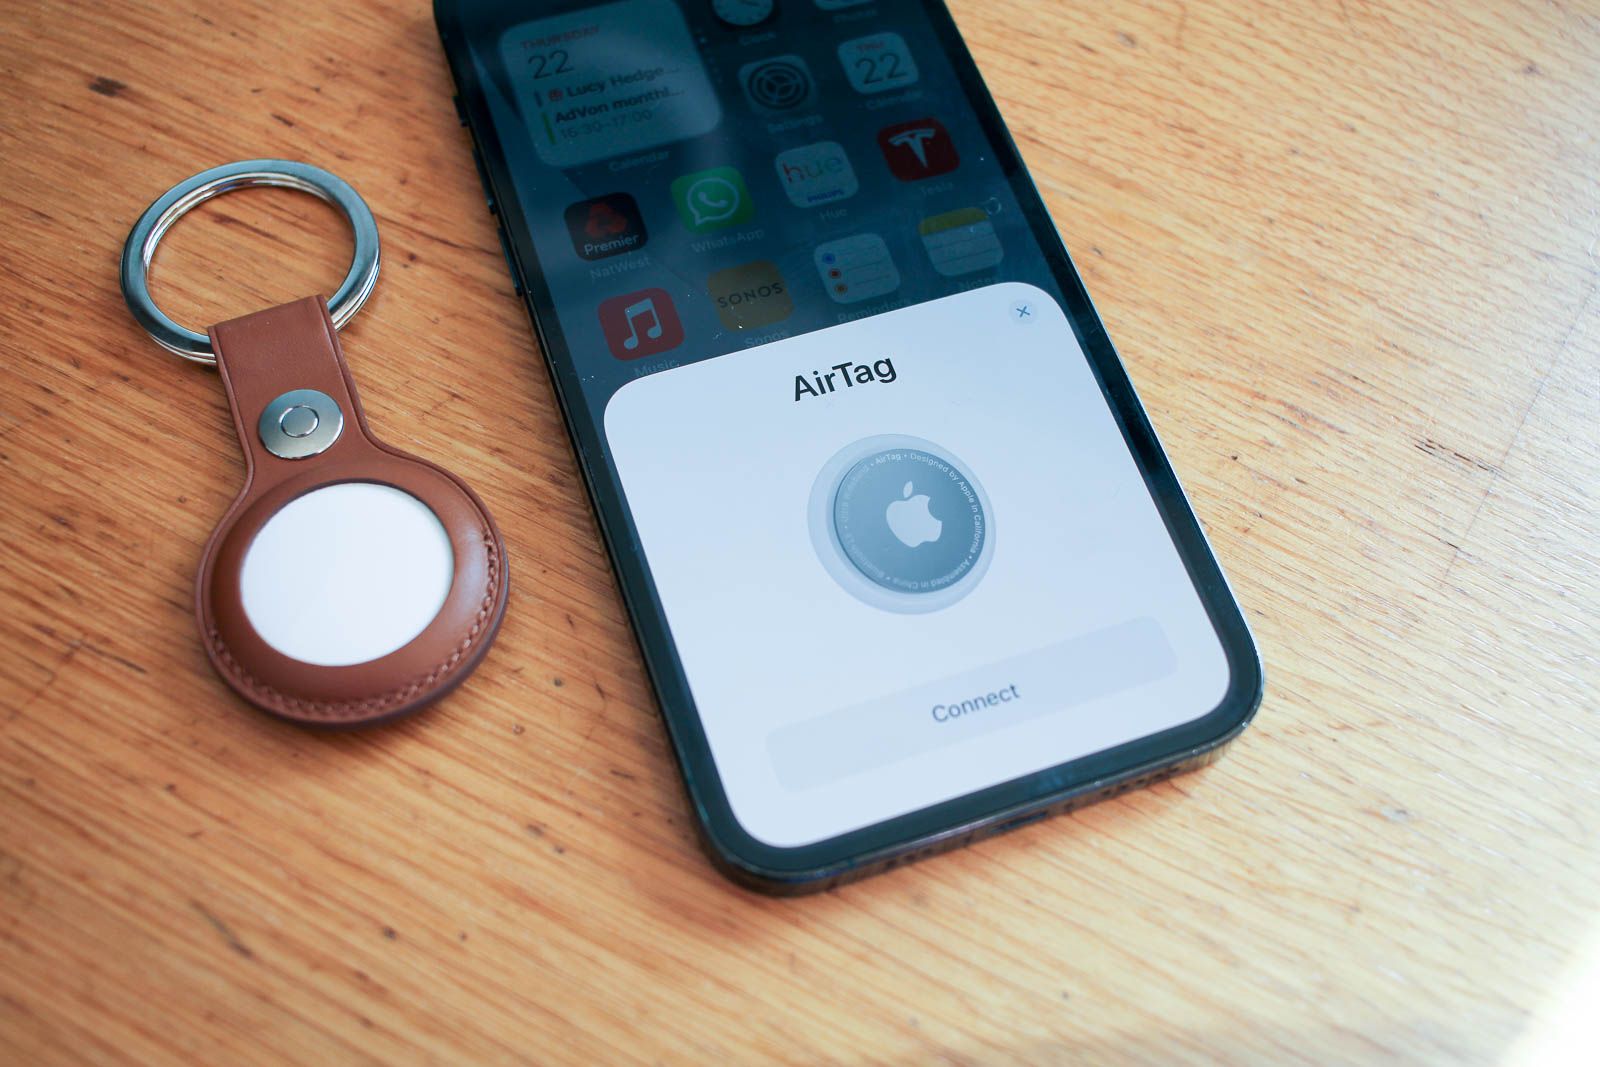 AirTag and iPhone being paired